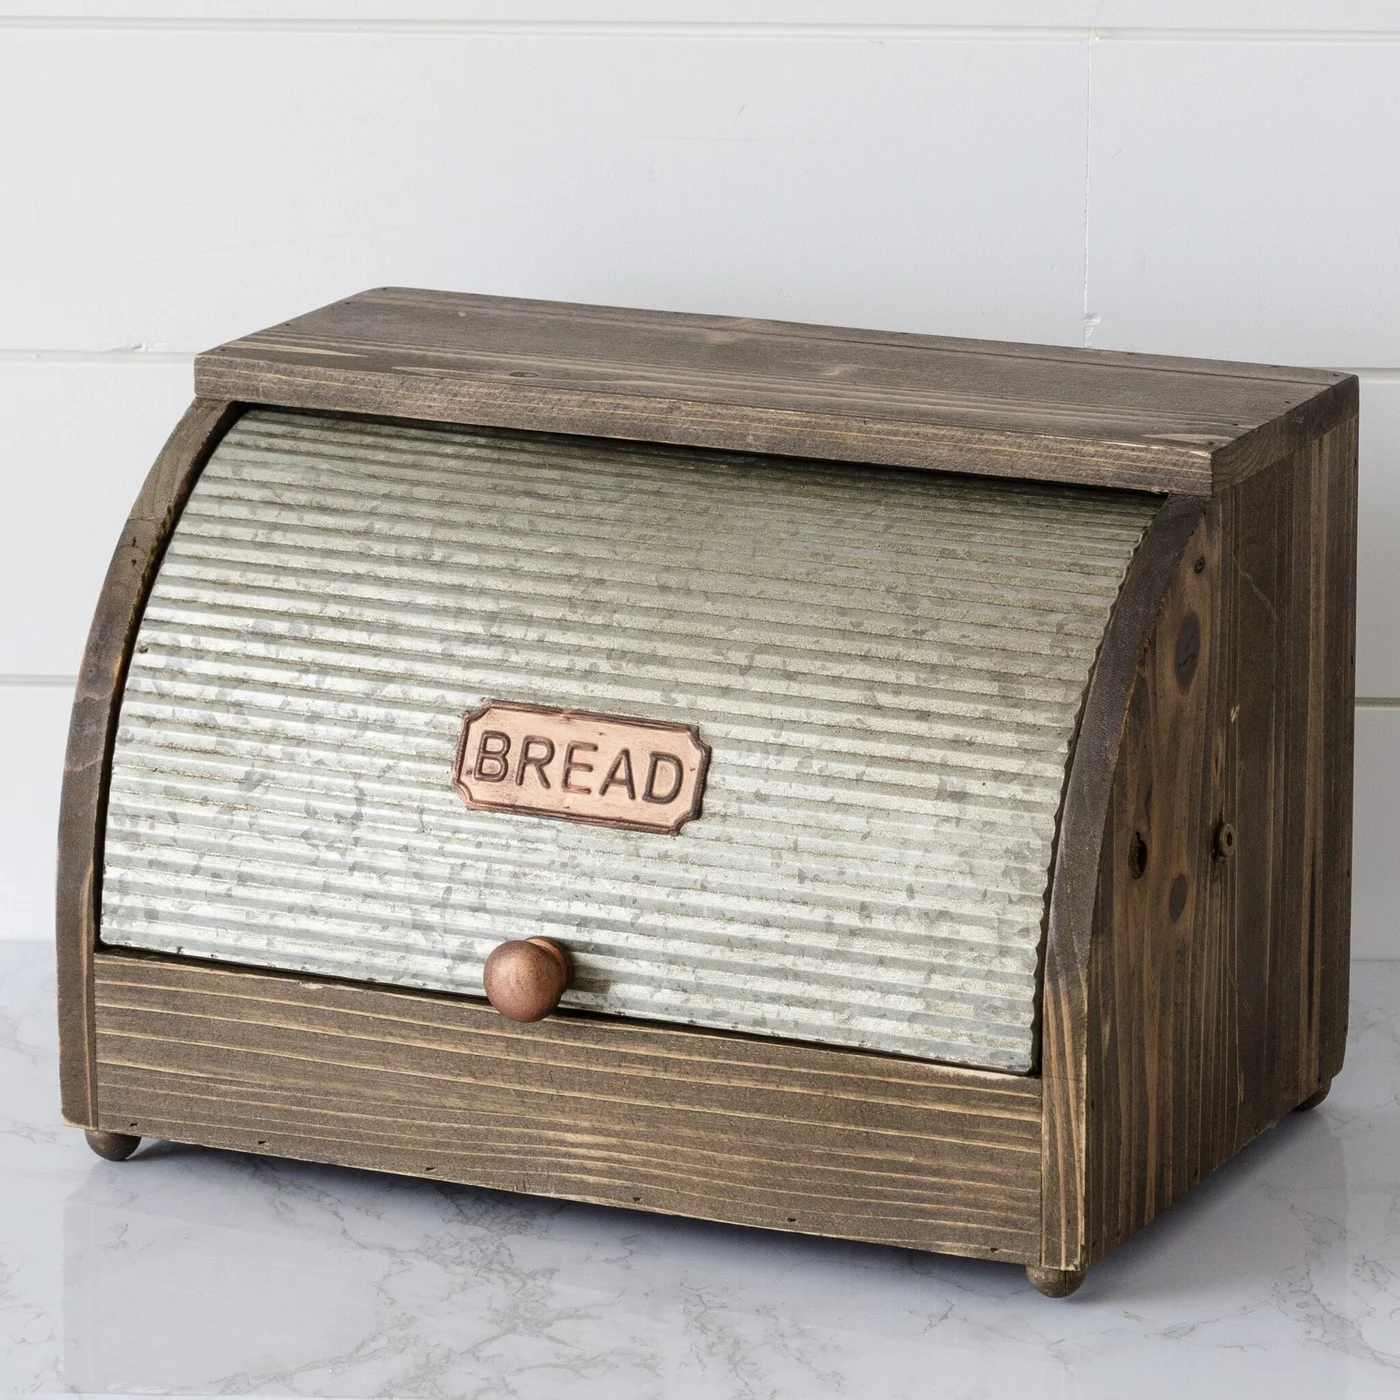 Rustic Corrugated Metal and Wood Bread Box